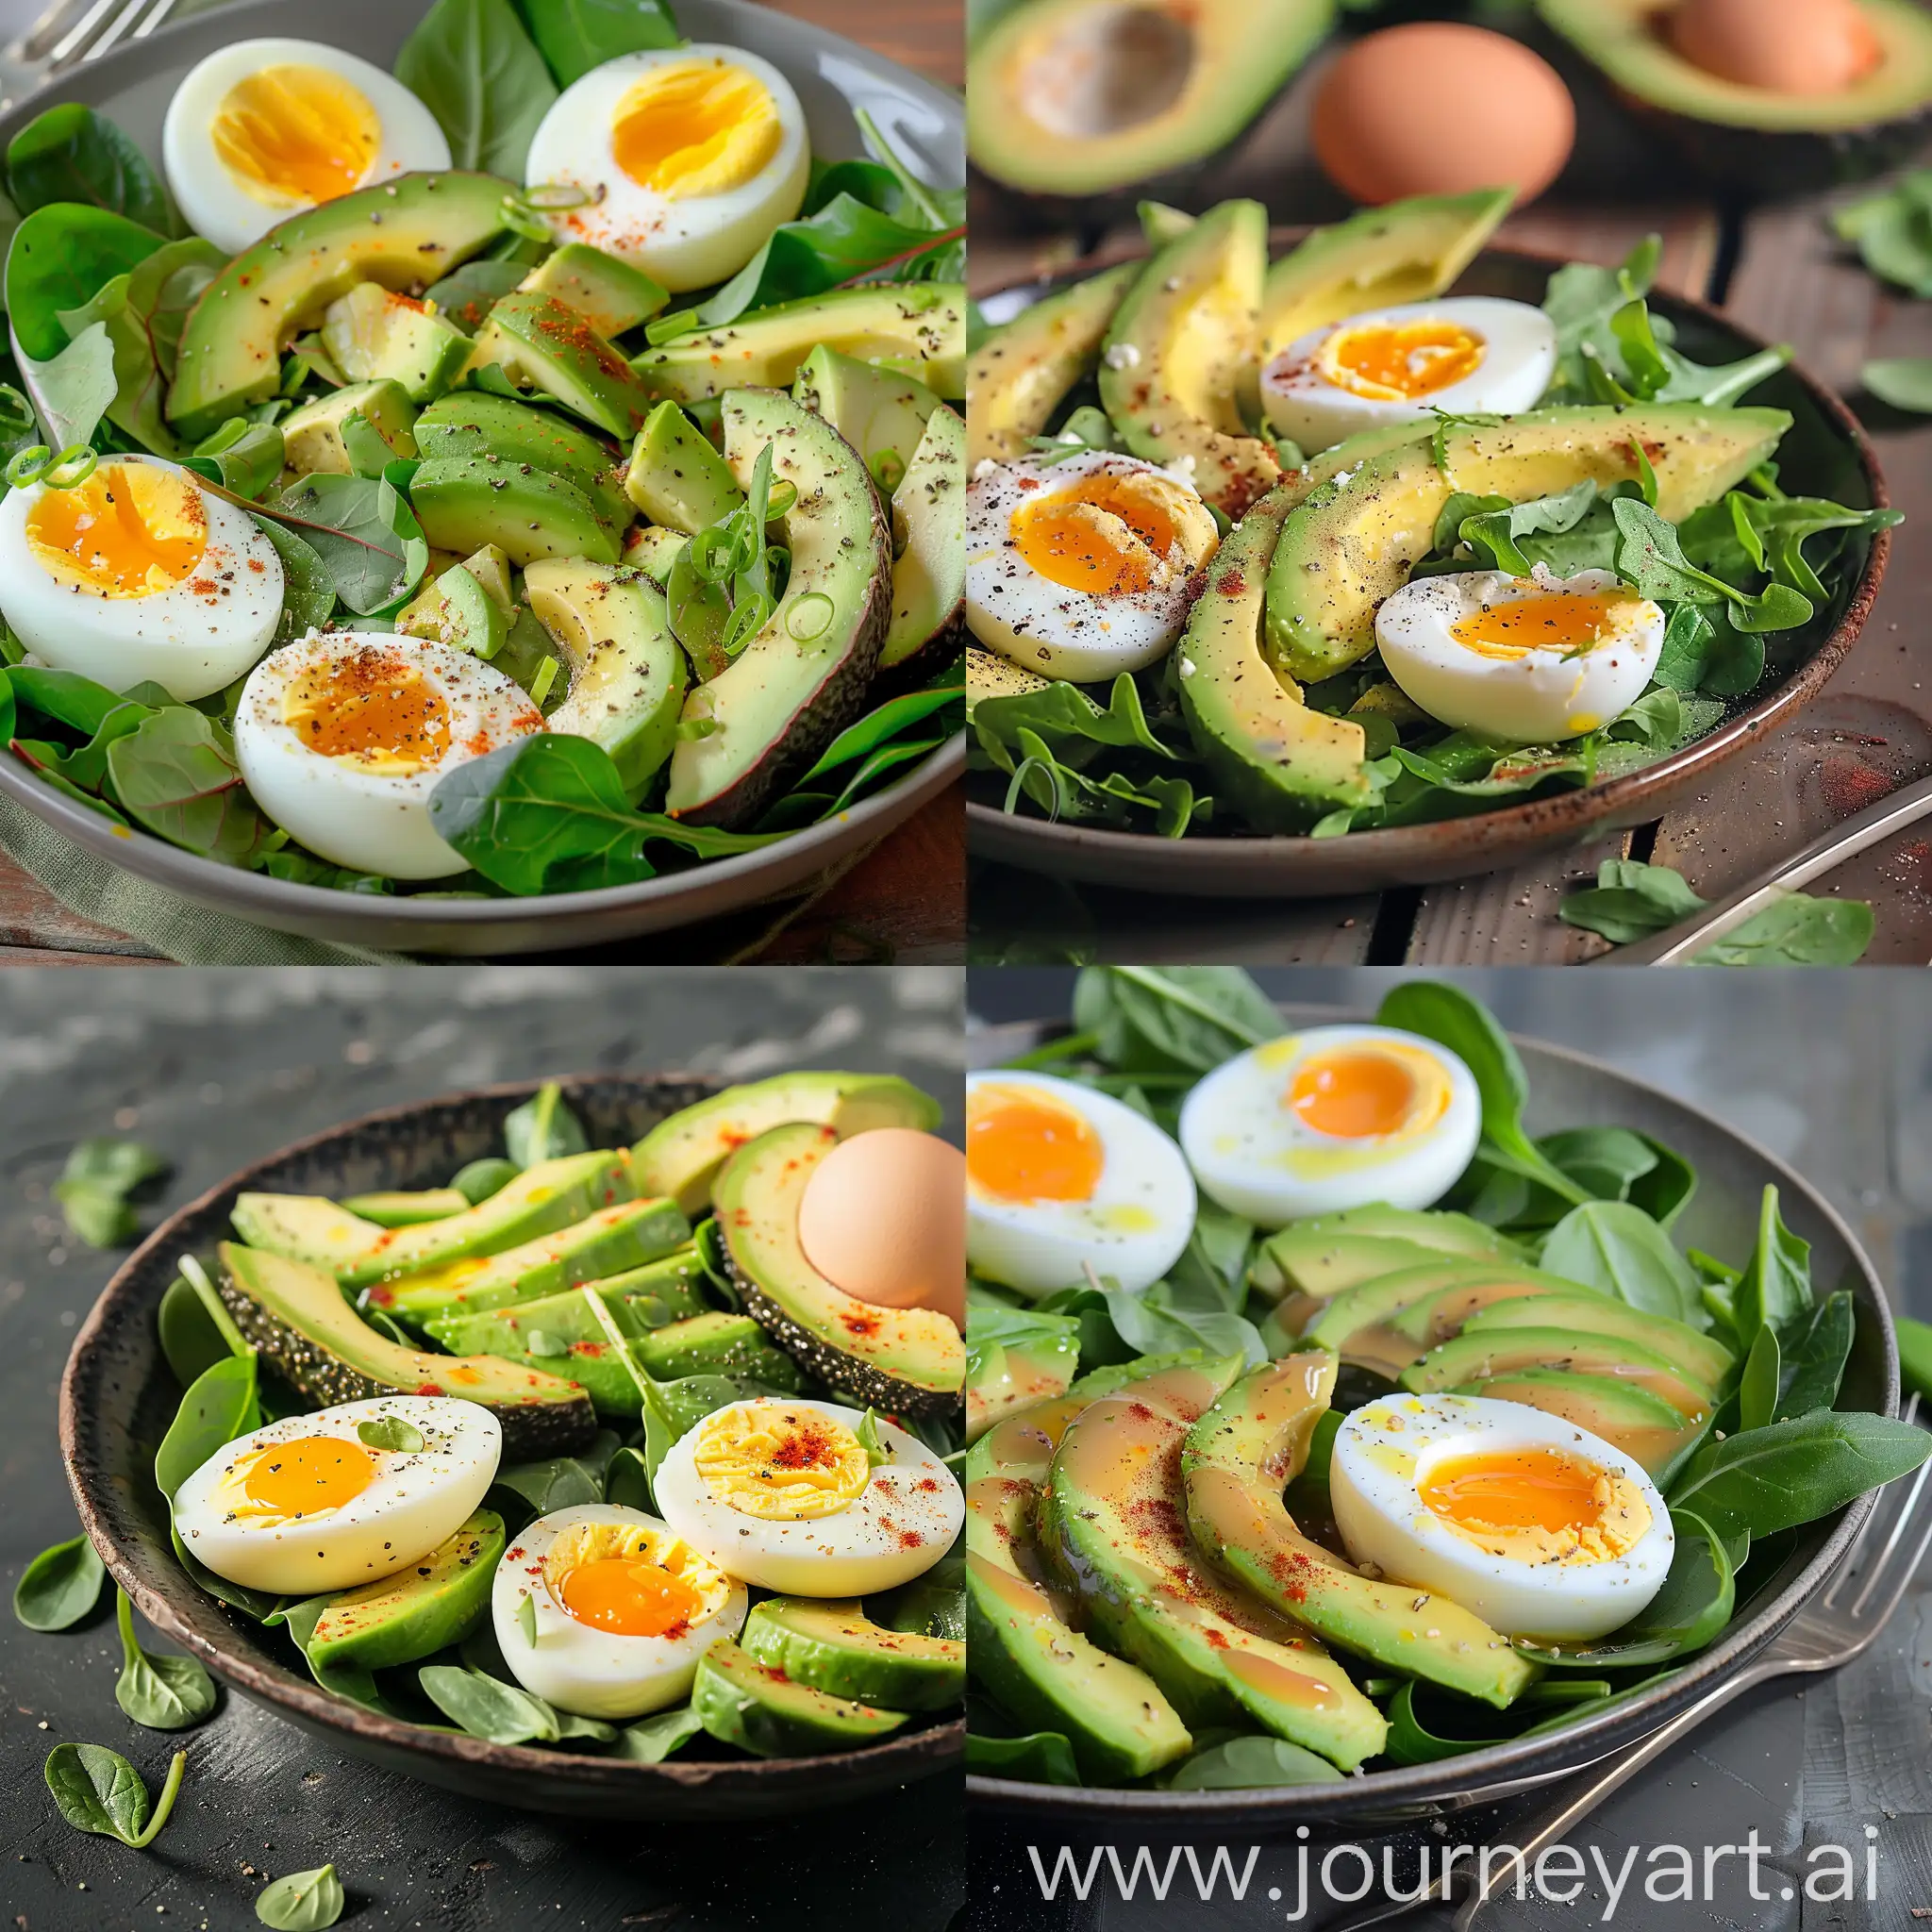 Healthy salad with avocado and eggs and salad leaves